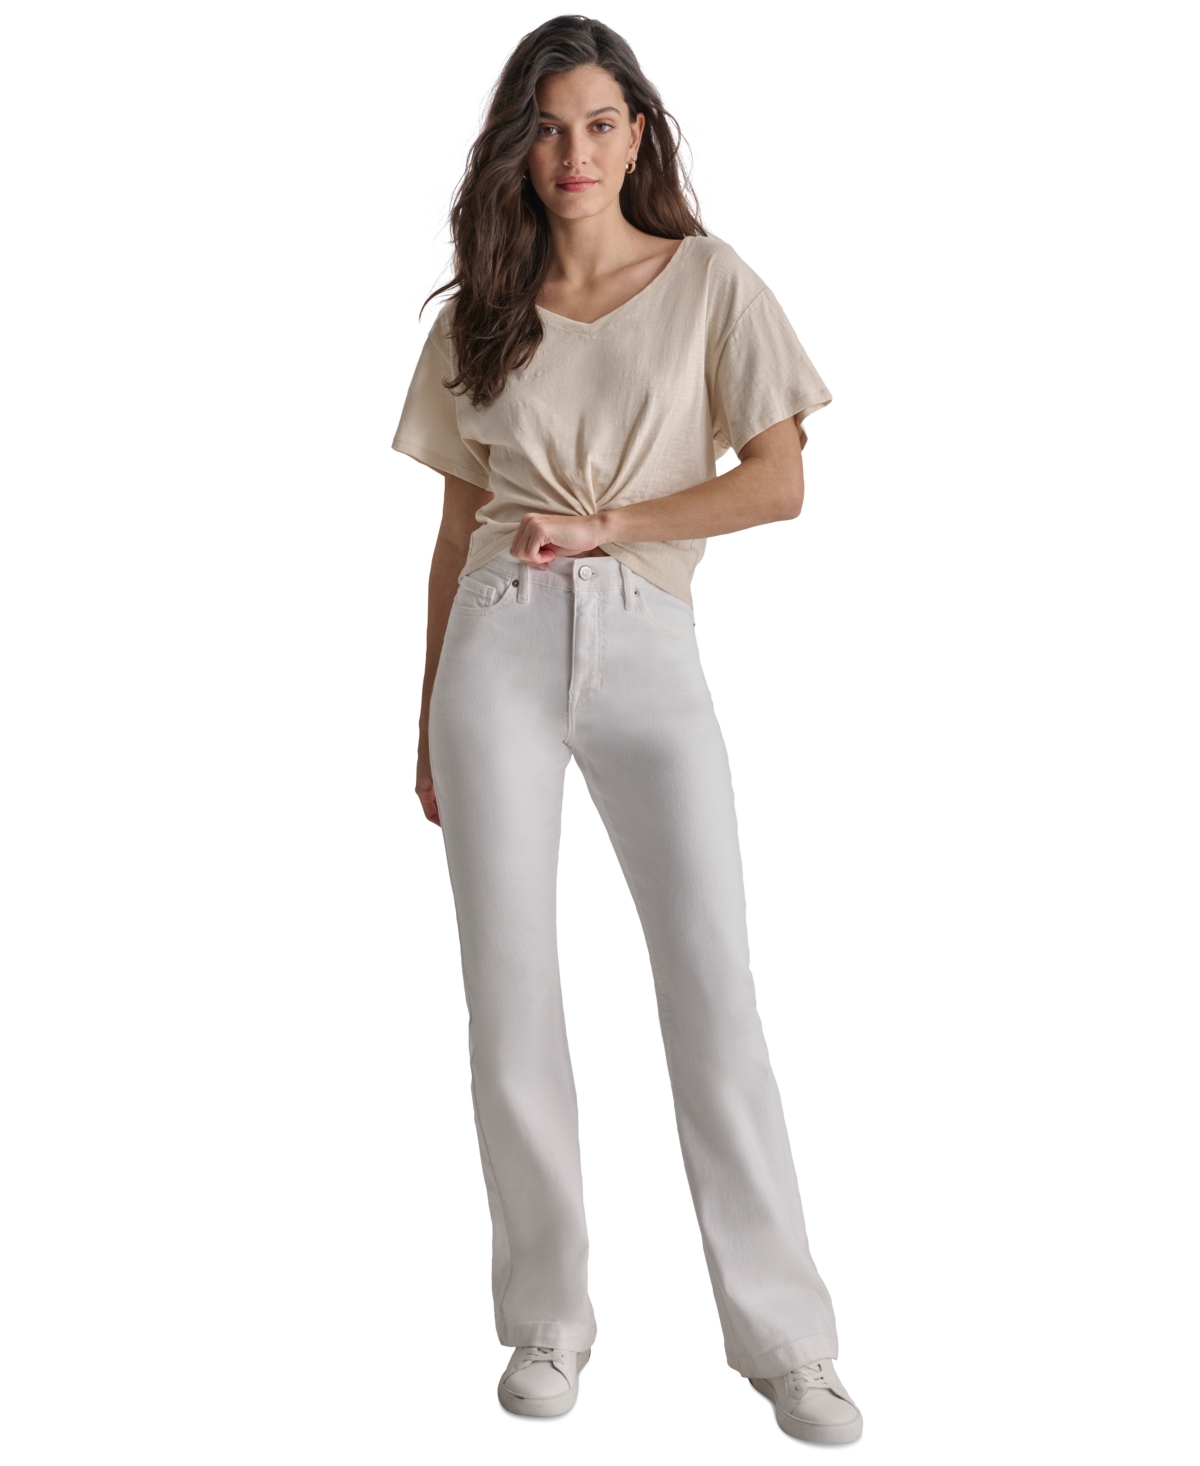 Women's High-Rise Flare Jeans - Optic White